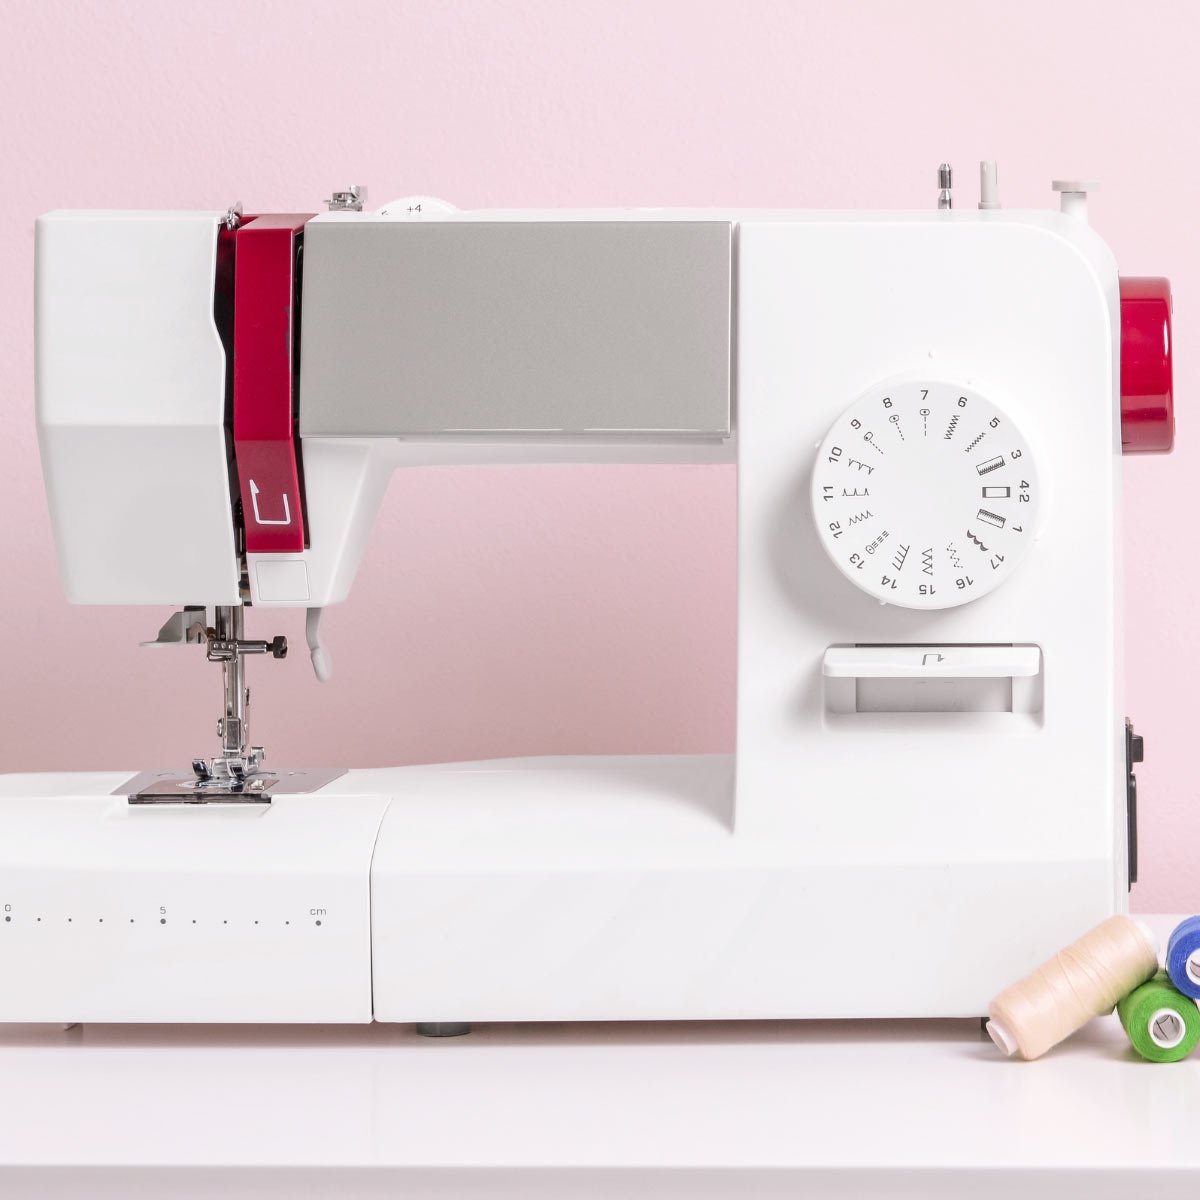 Machine Sewing Techniques - A Basic Know How